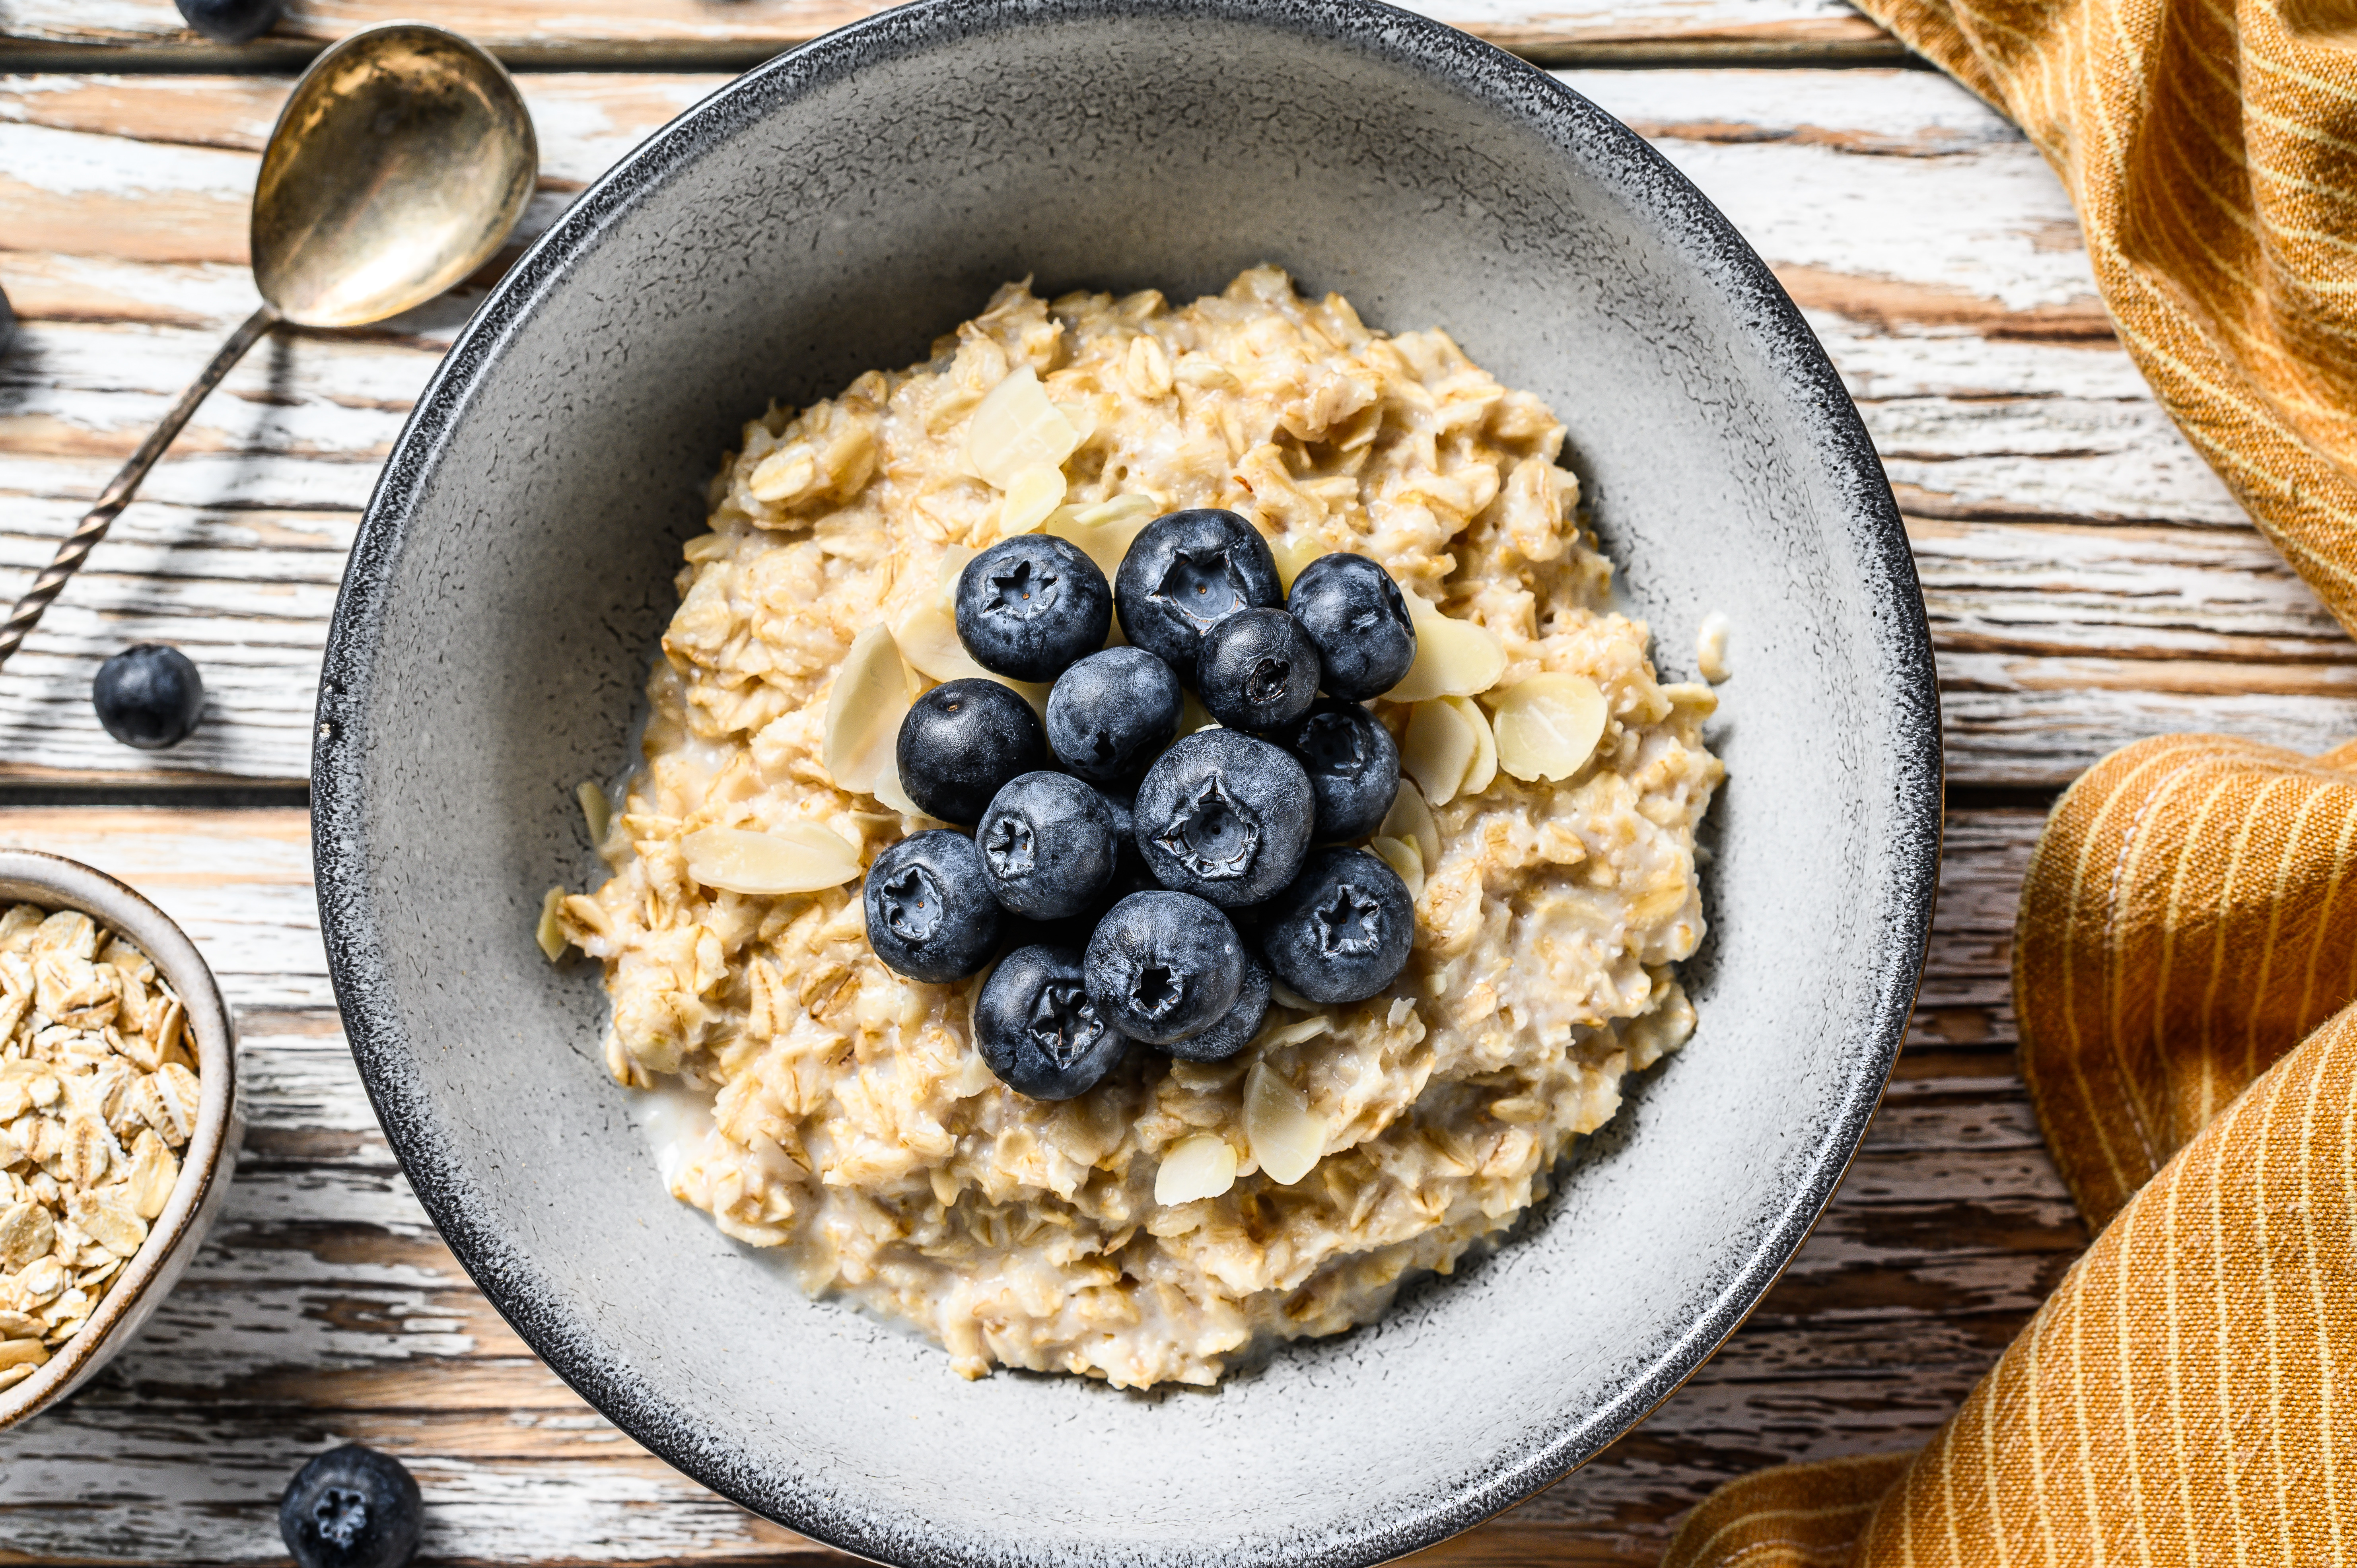 How to Prepare Oatmeal for Acid Reflux? 